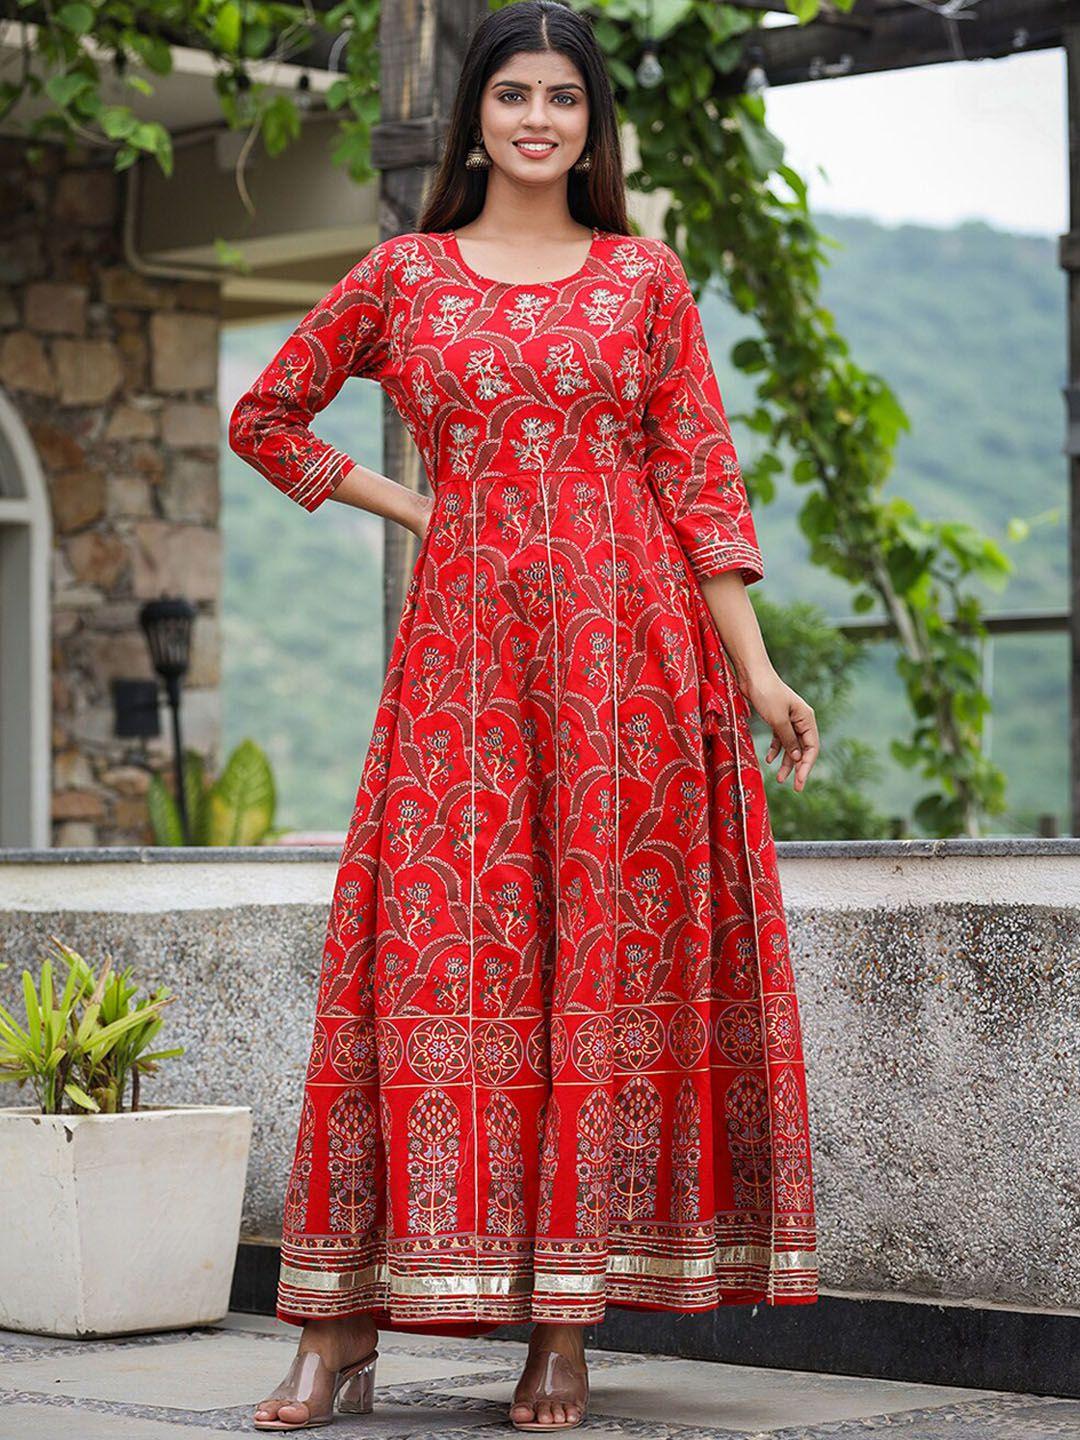 kaajh women red floral ankle-length pure cotton ethnic empire dresses